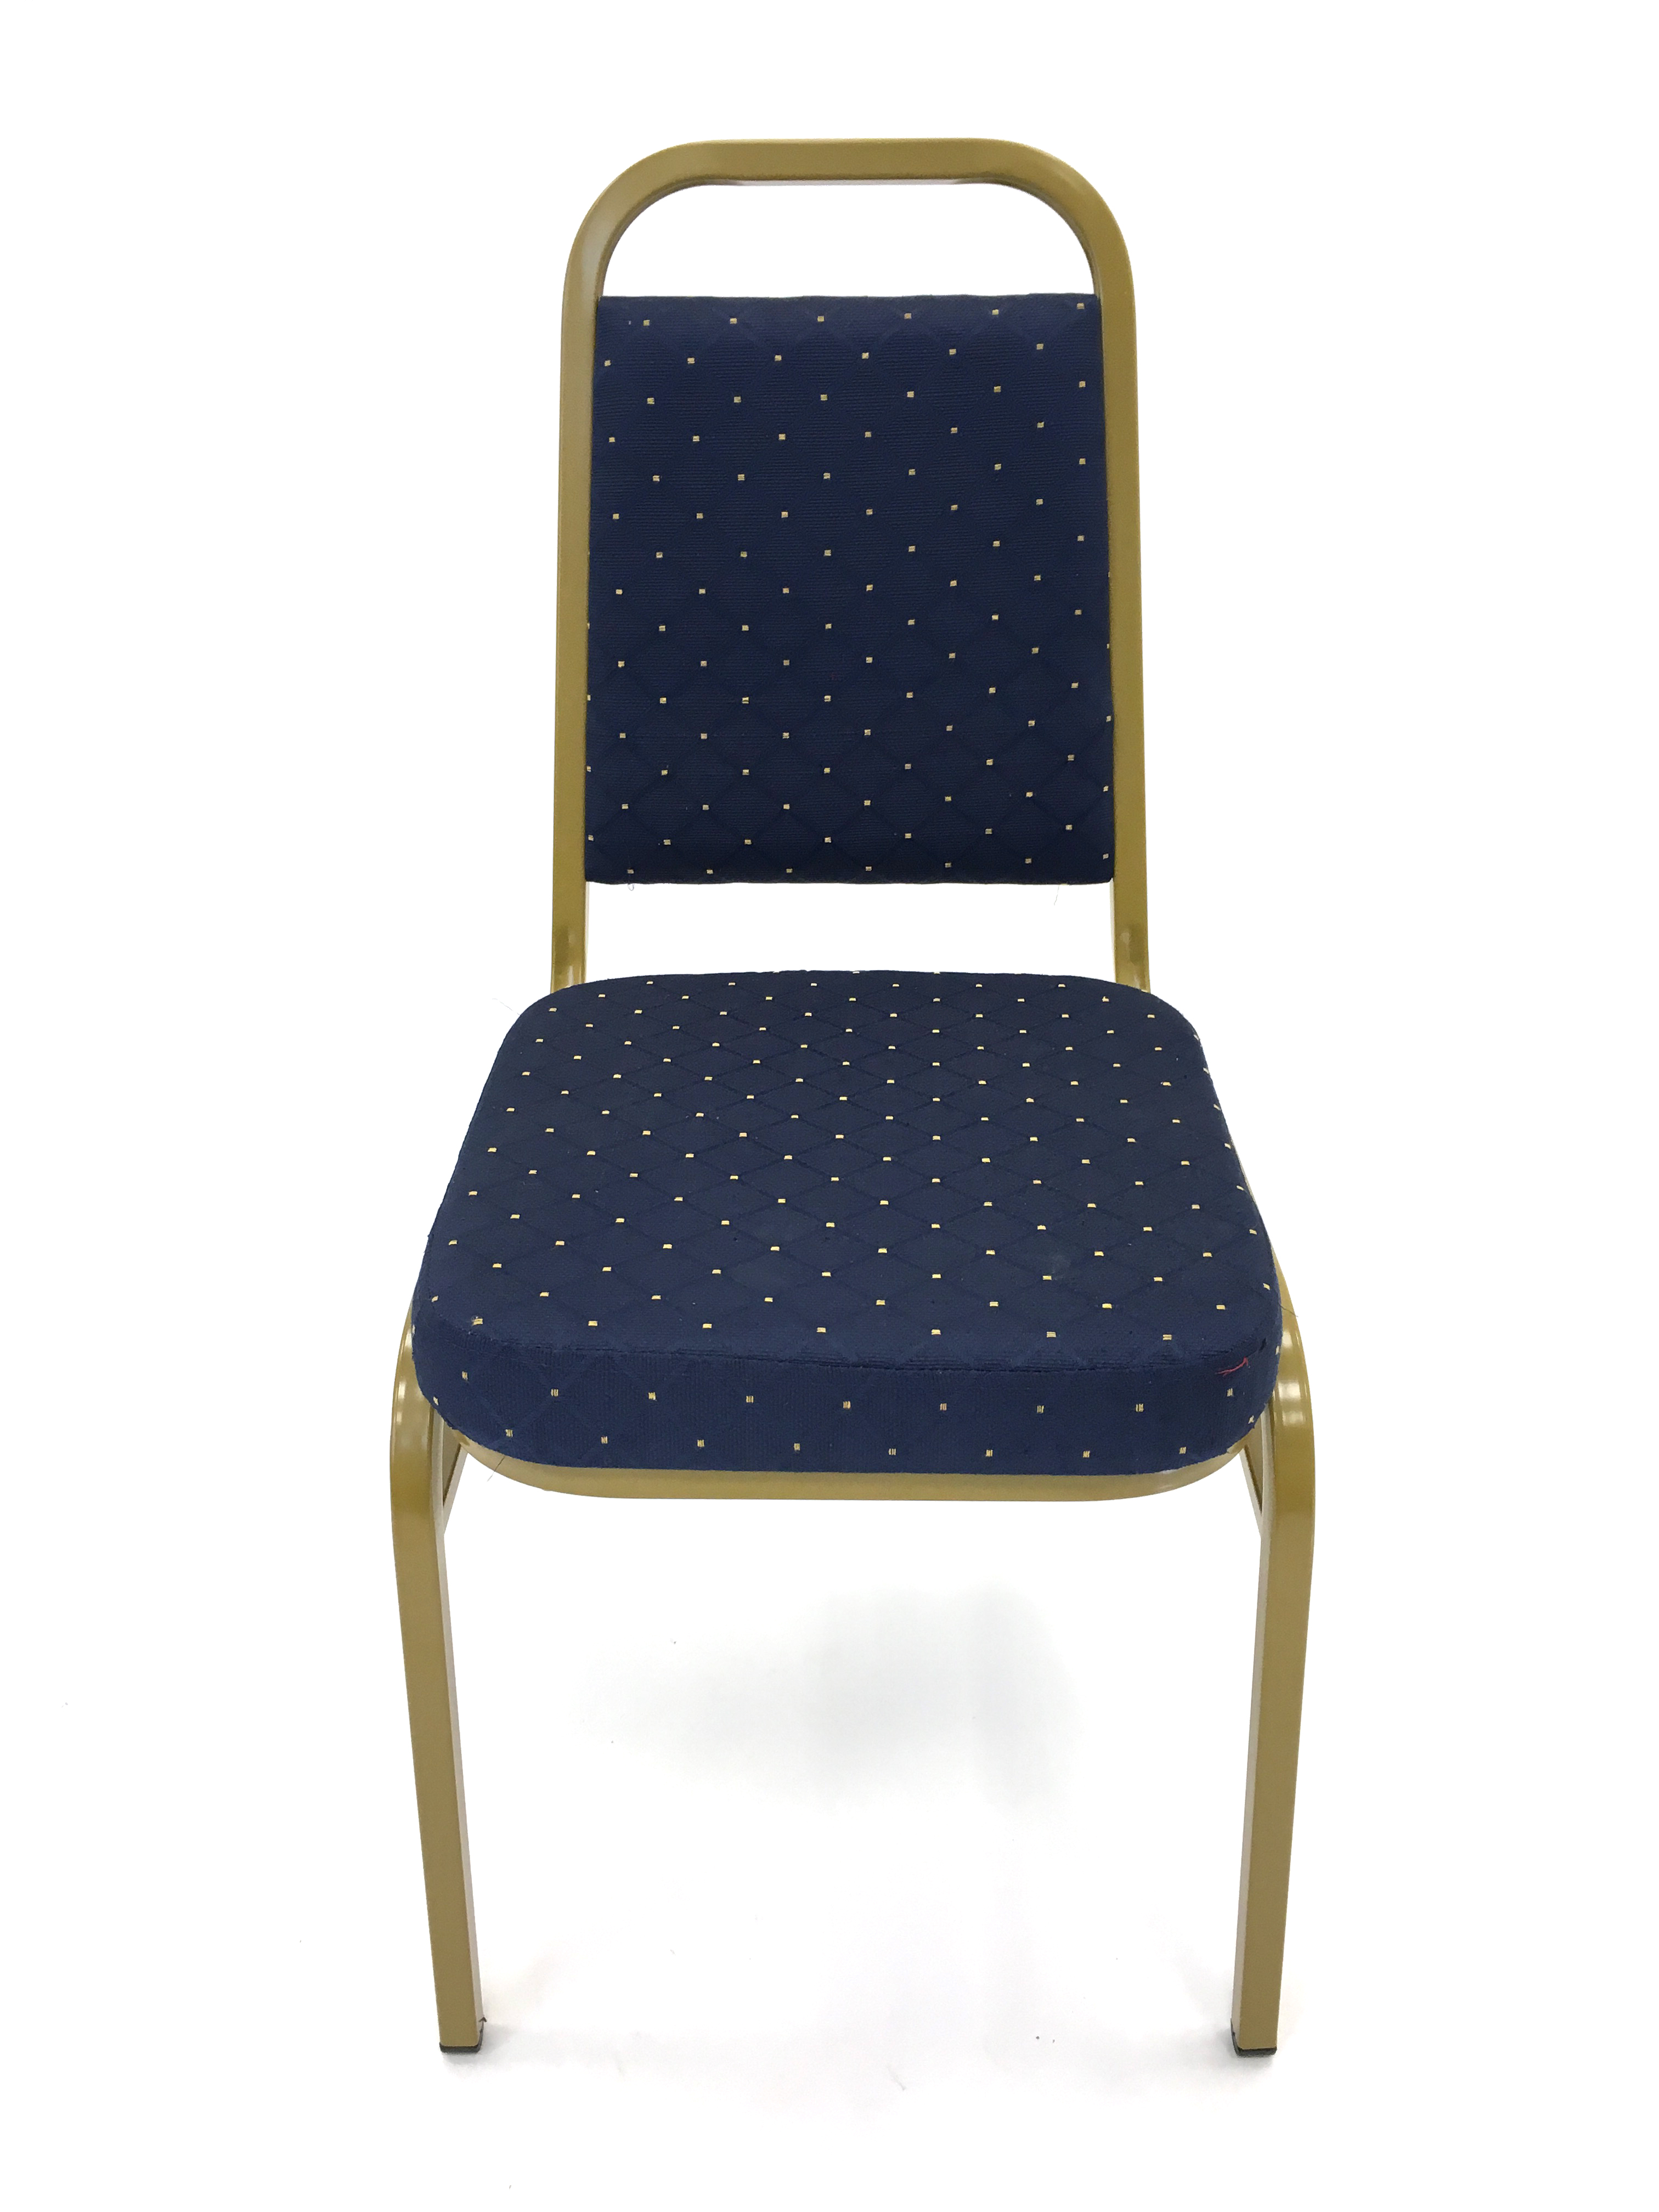 Blue banquet conference chair - BE Event Hire